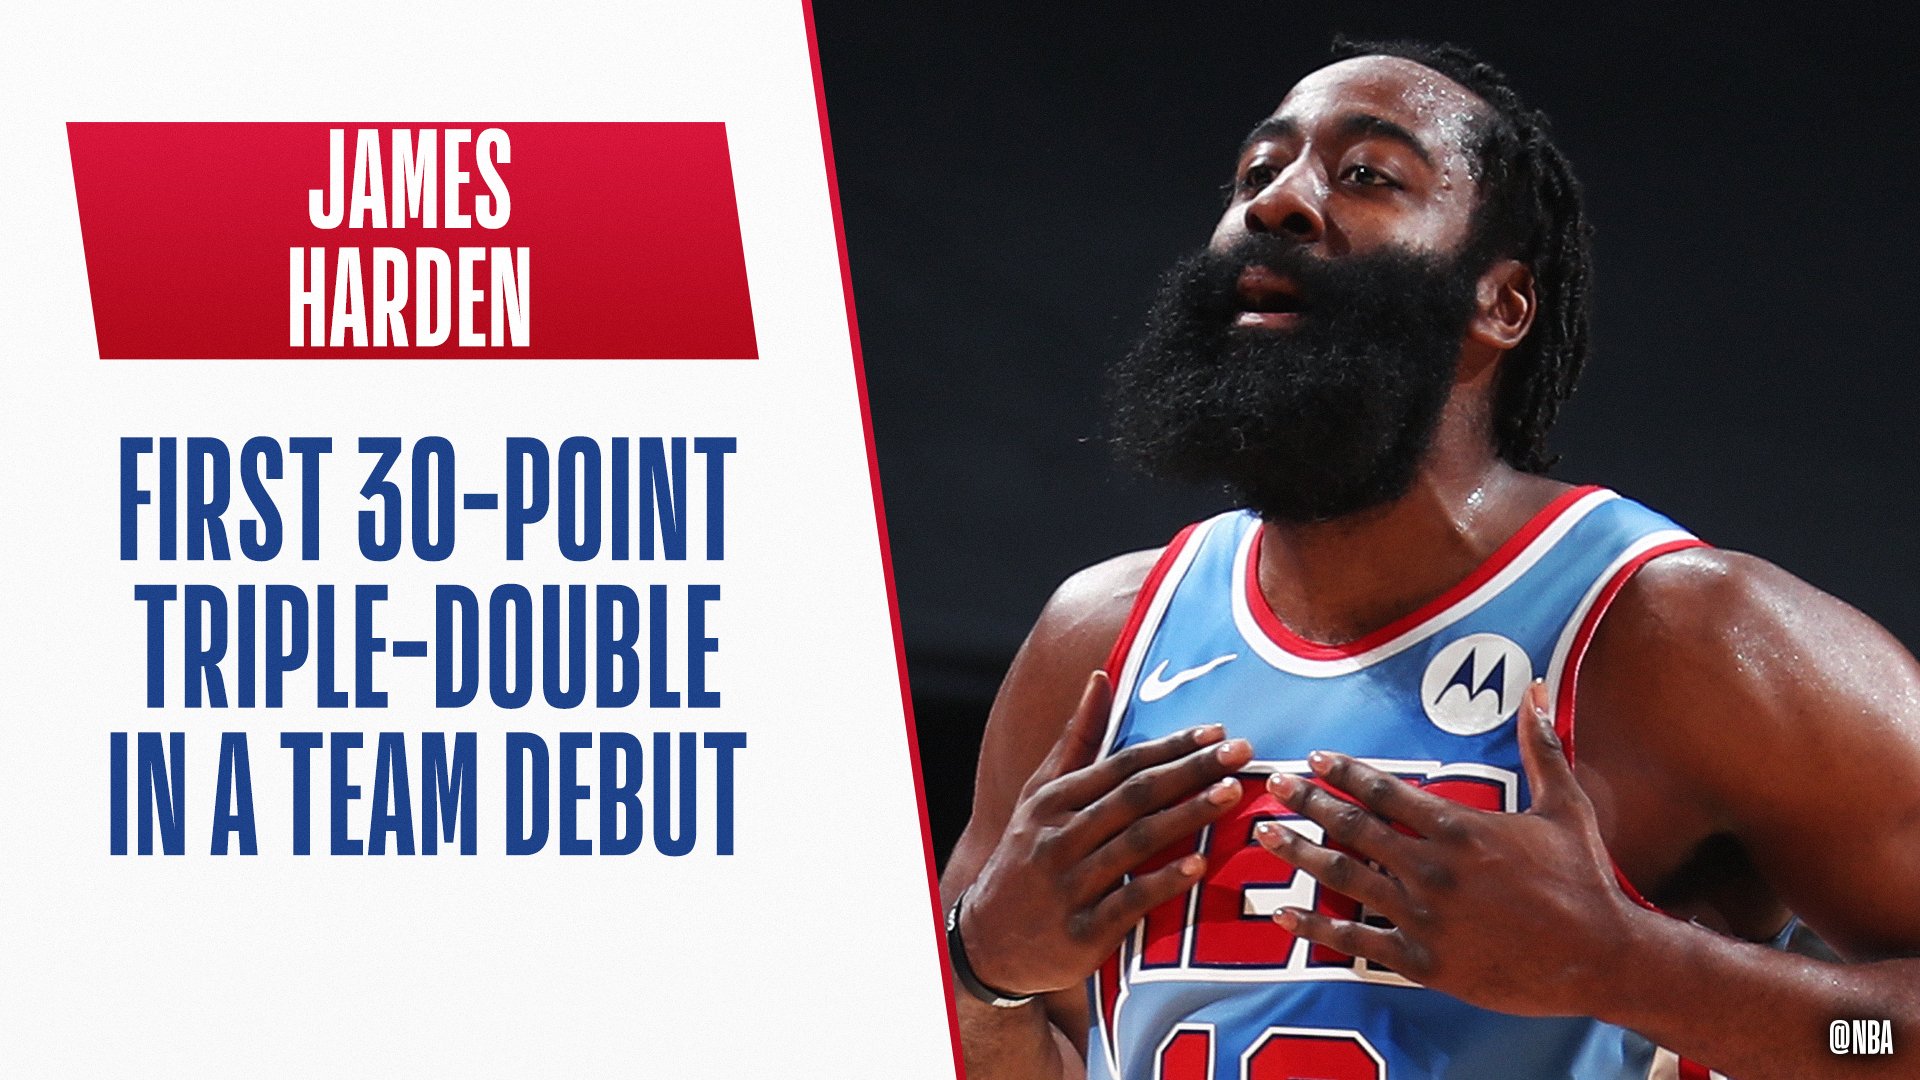 James Harden creates History in Nets Debut